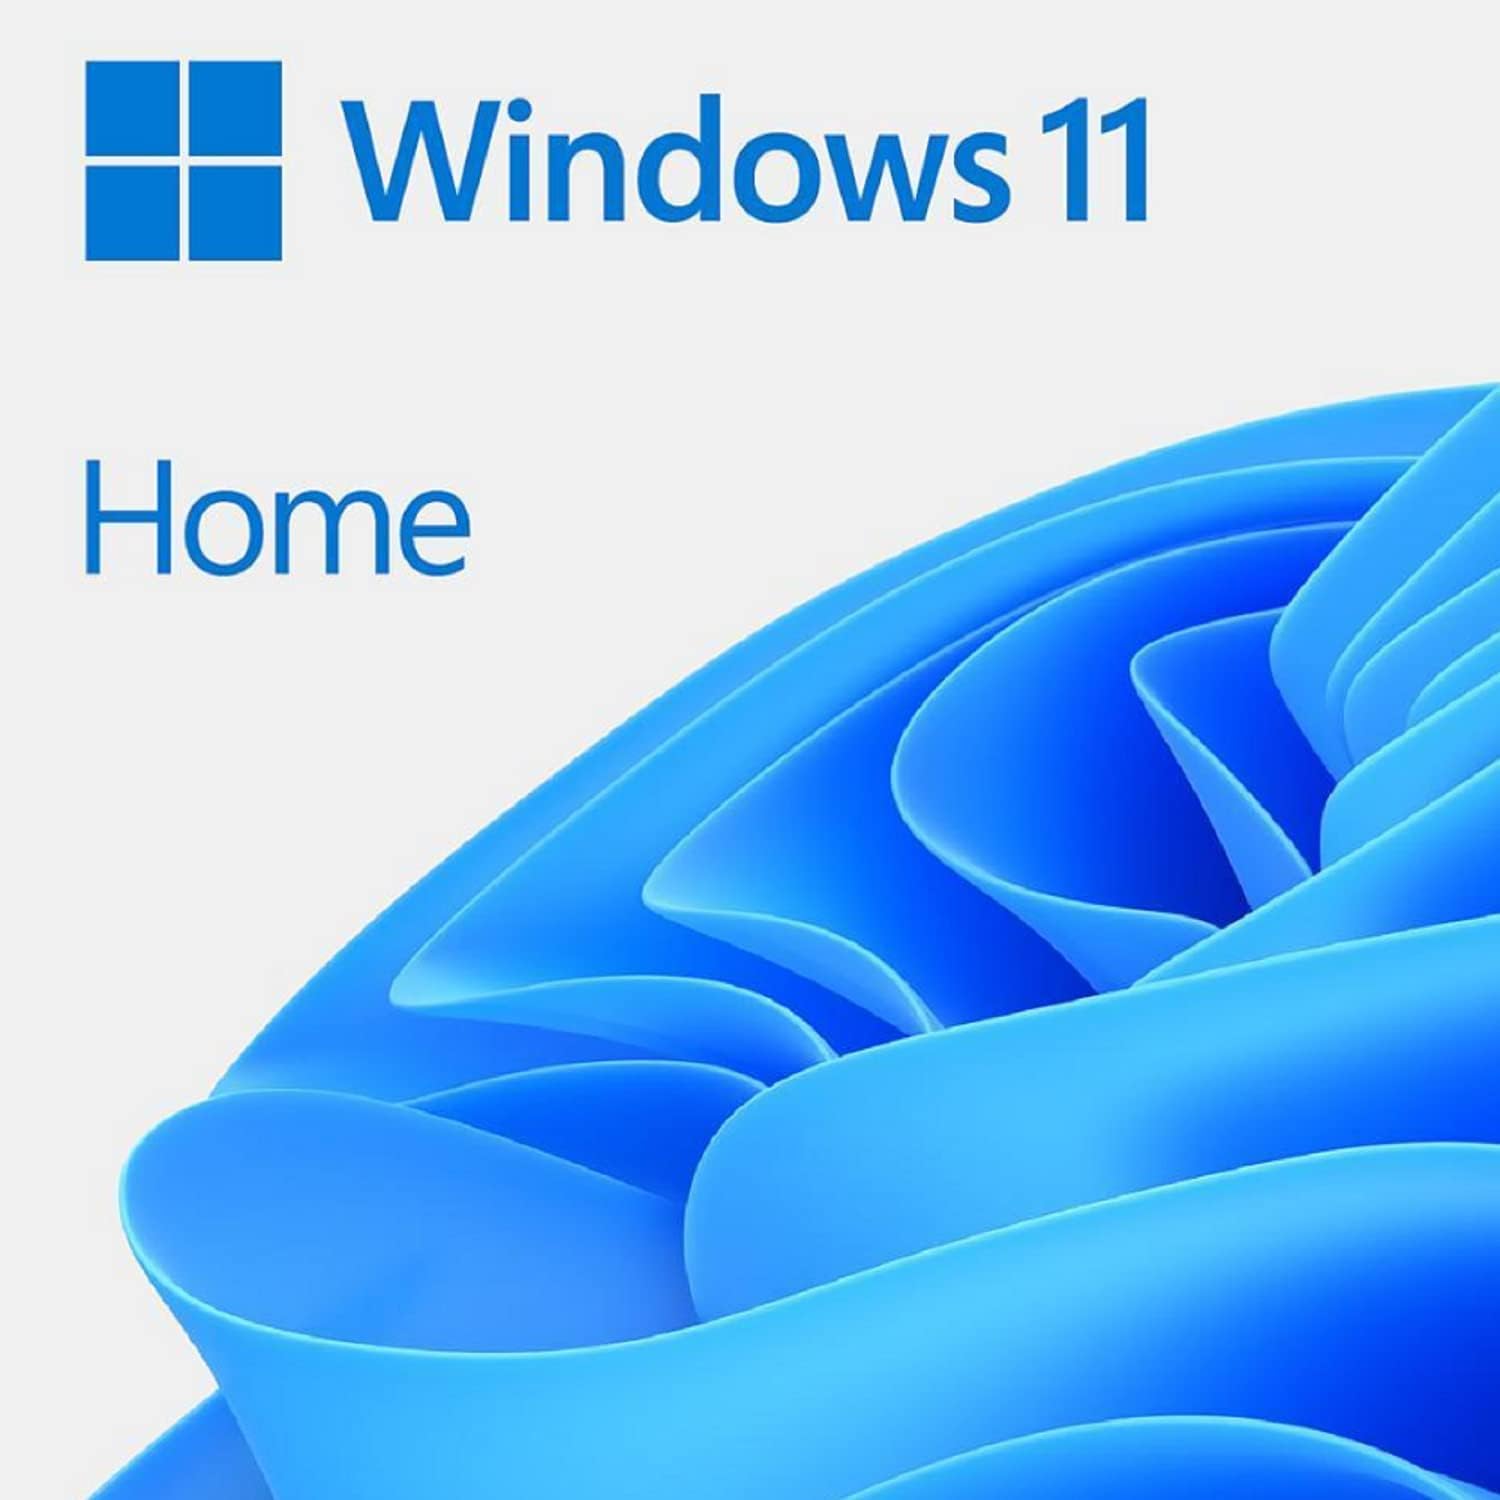 Microsoft System Builder | Windоws 11 Home | Intended [...]